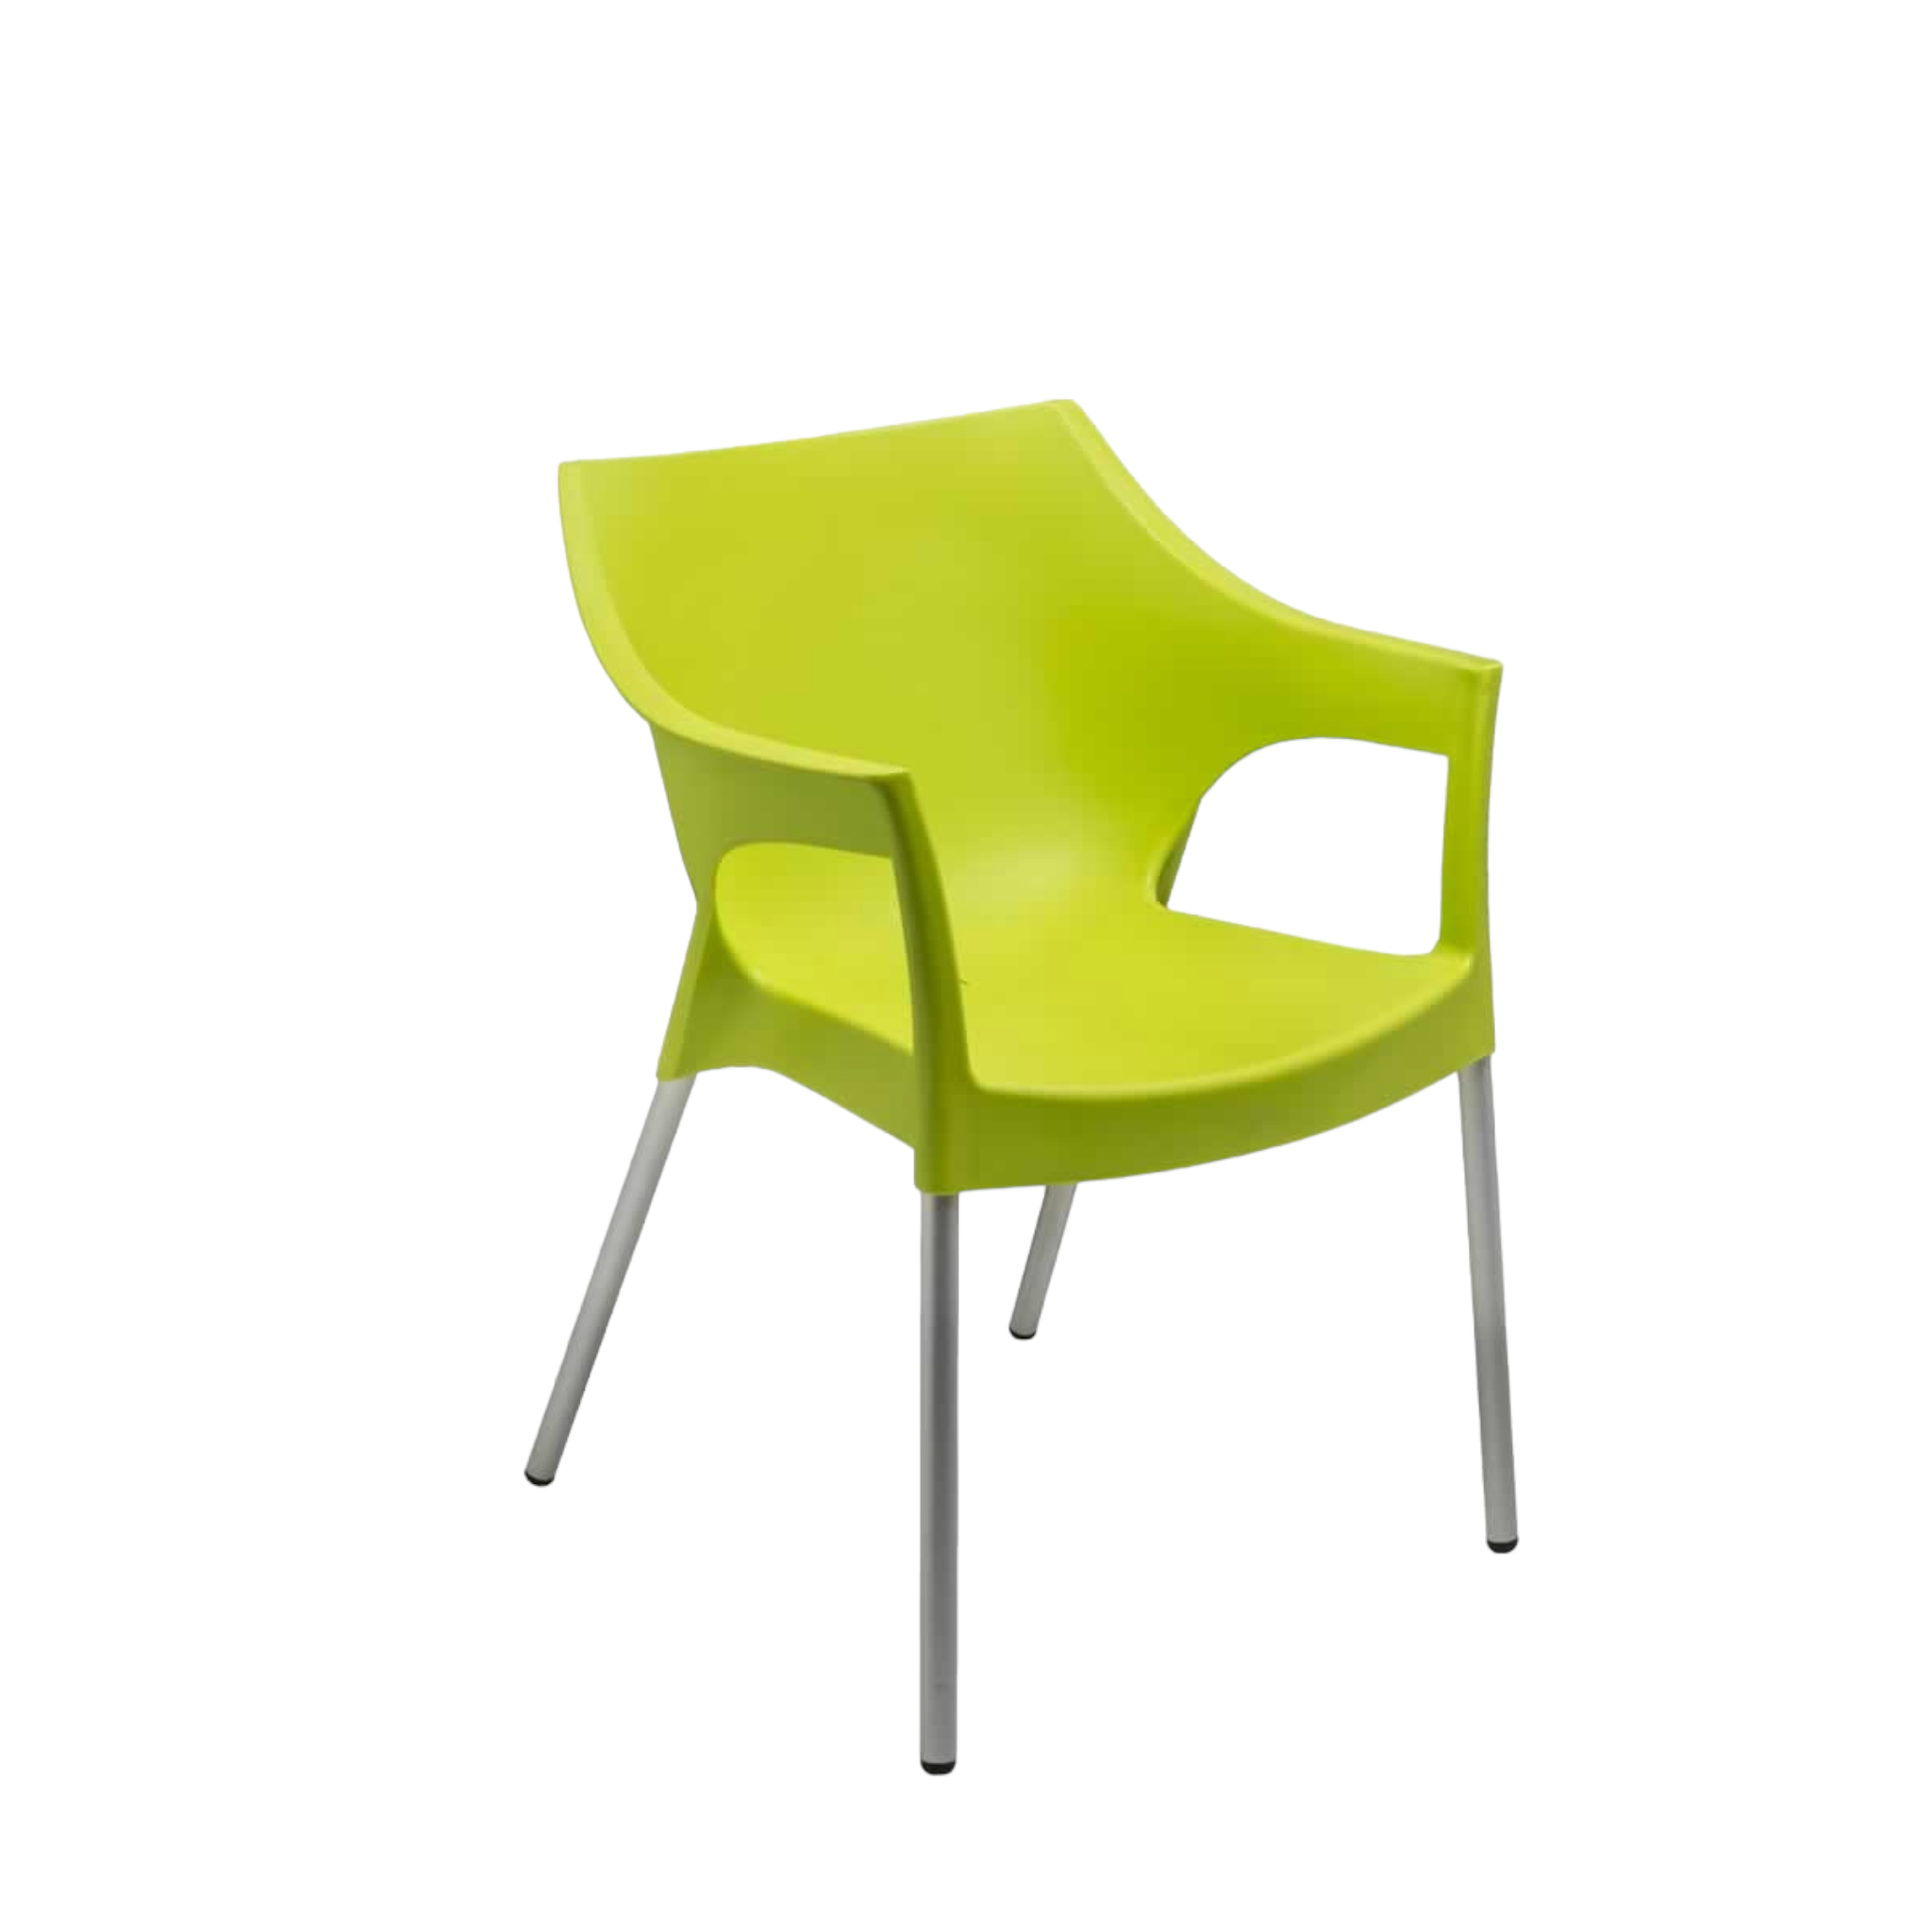 Chelsea Cafe Chair Contour Outdoor